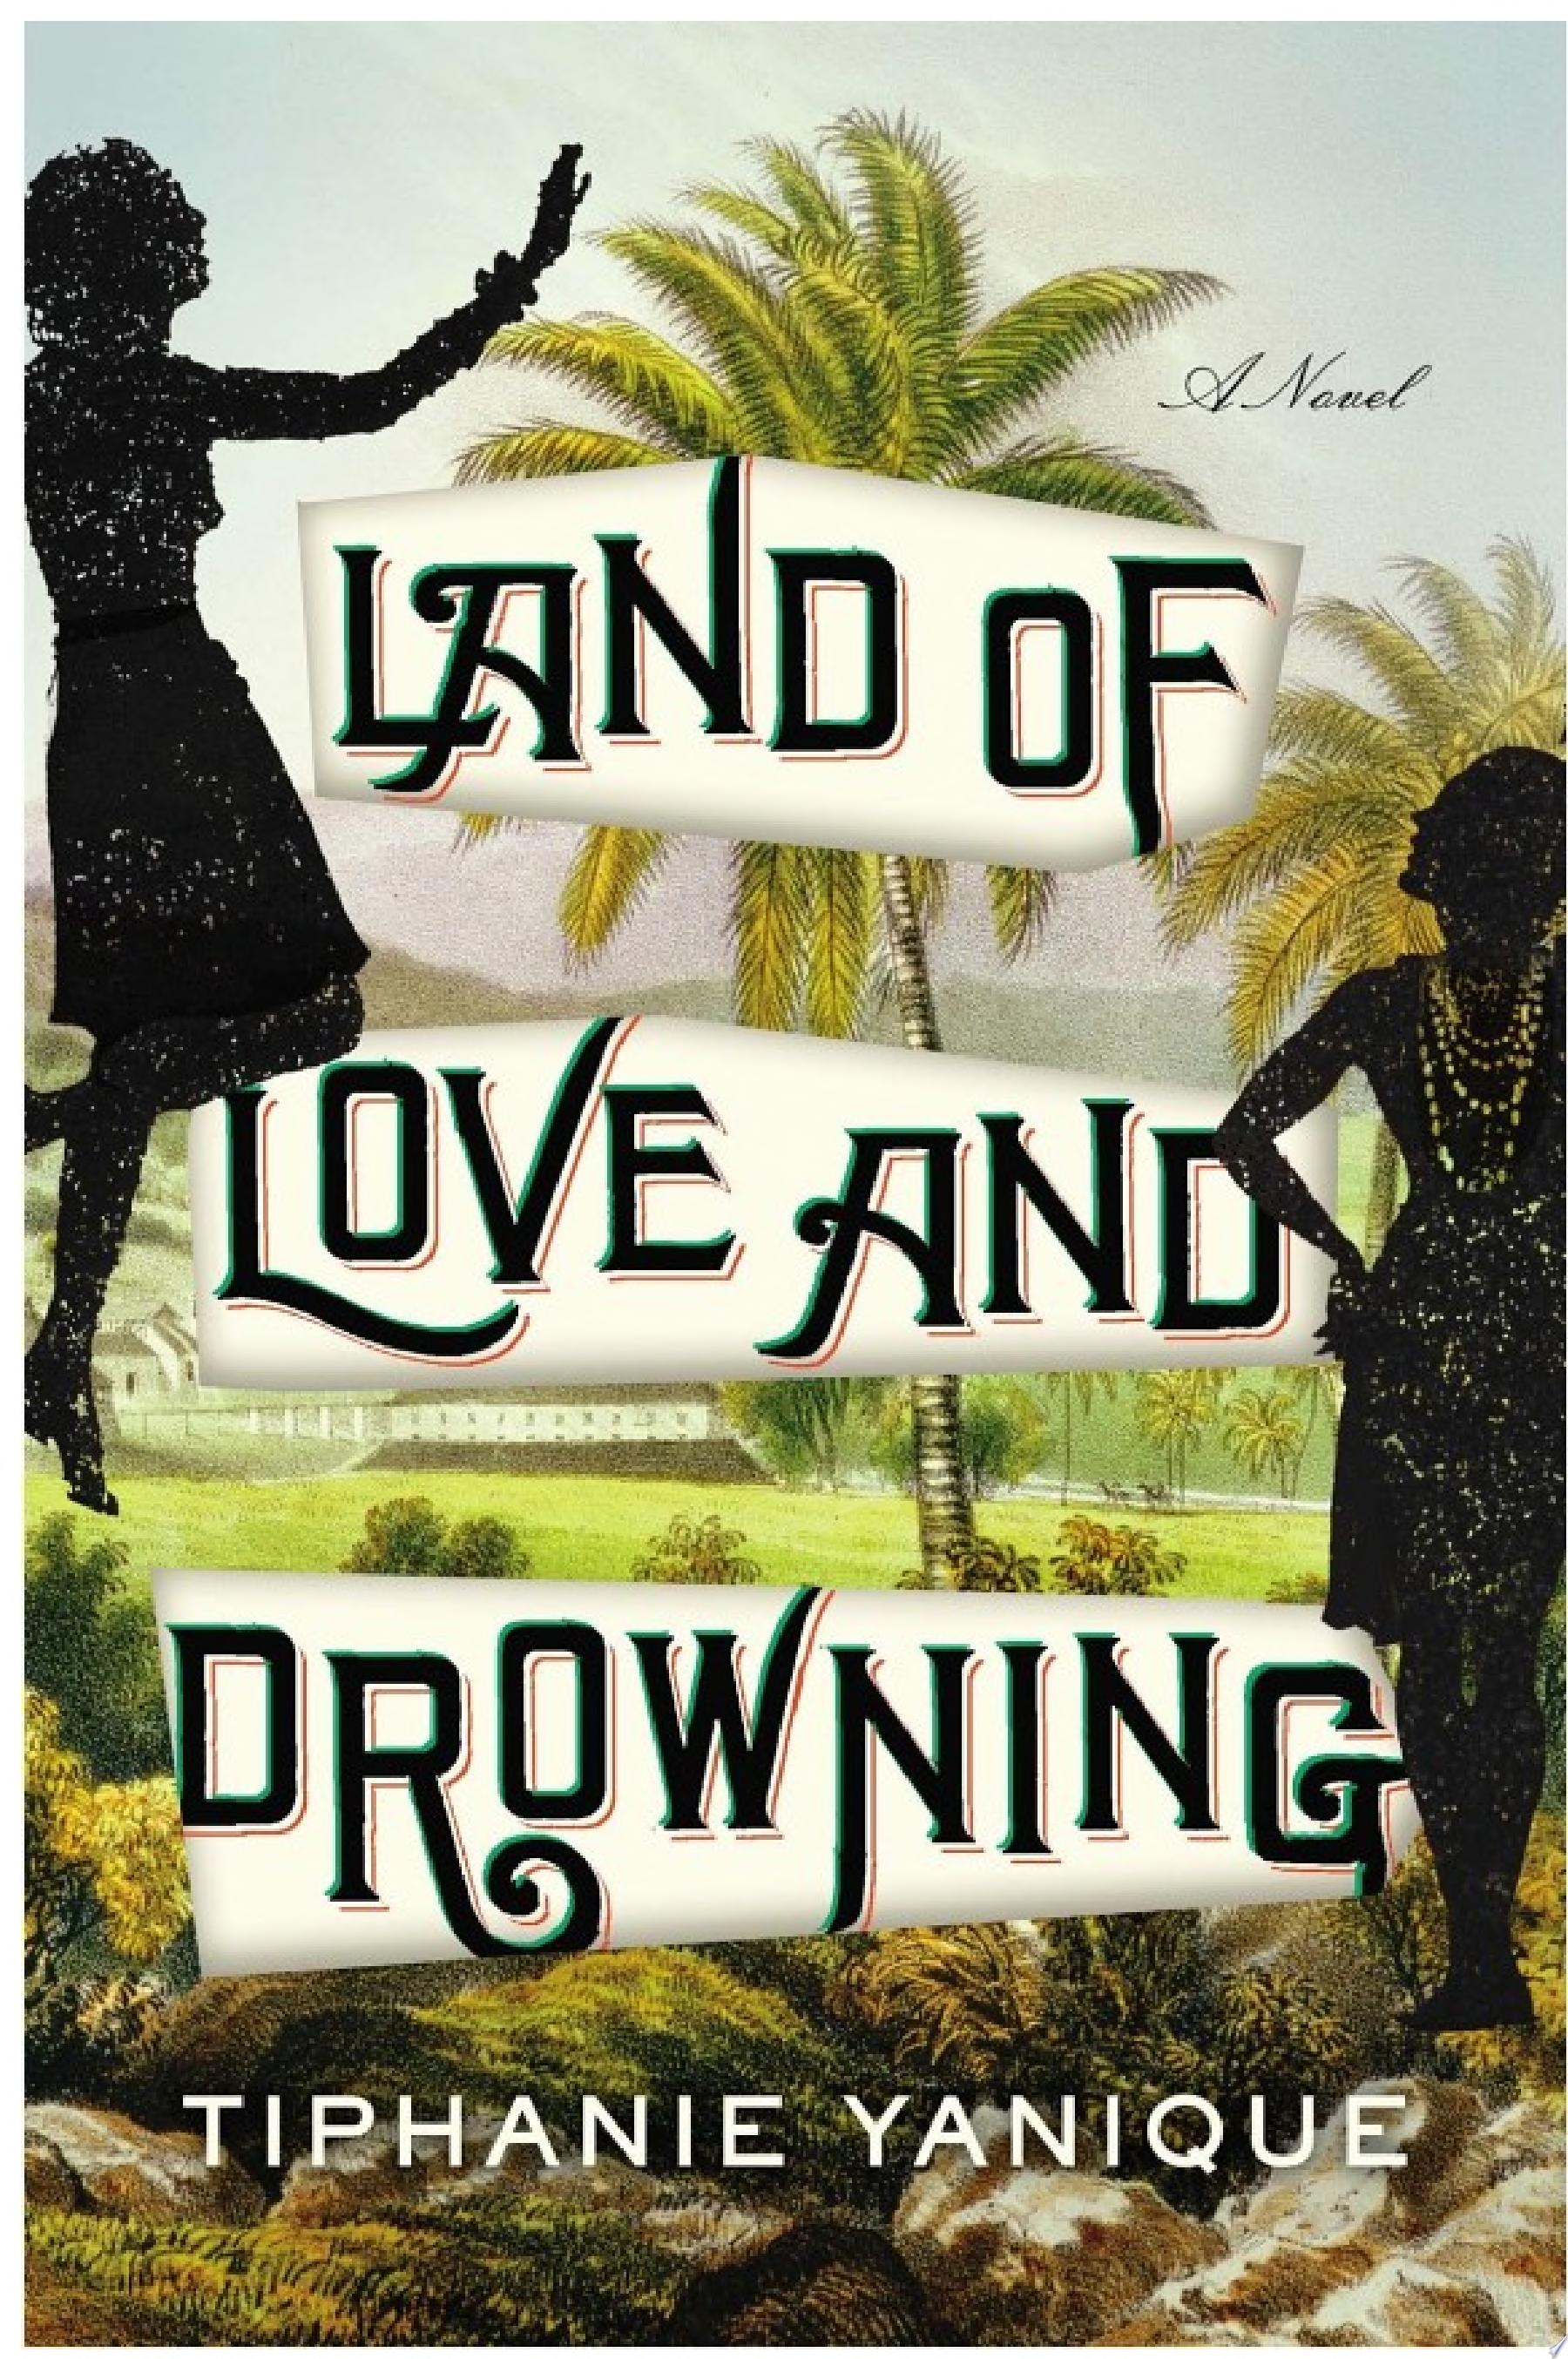 Image for "Land of Love and Drowning"